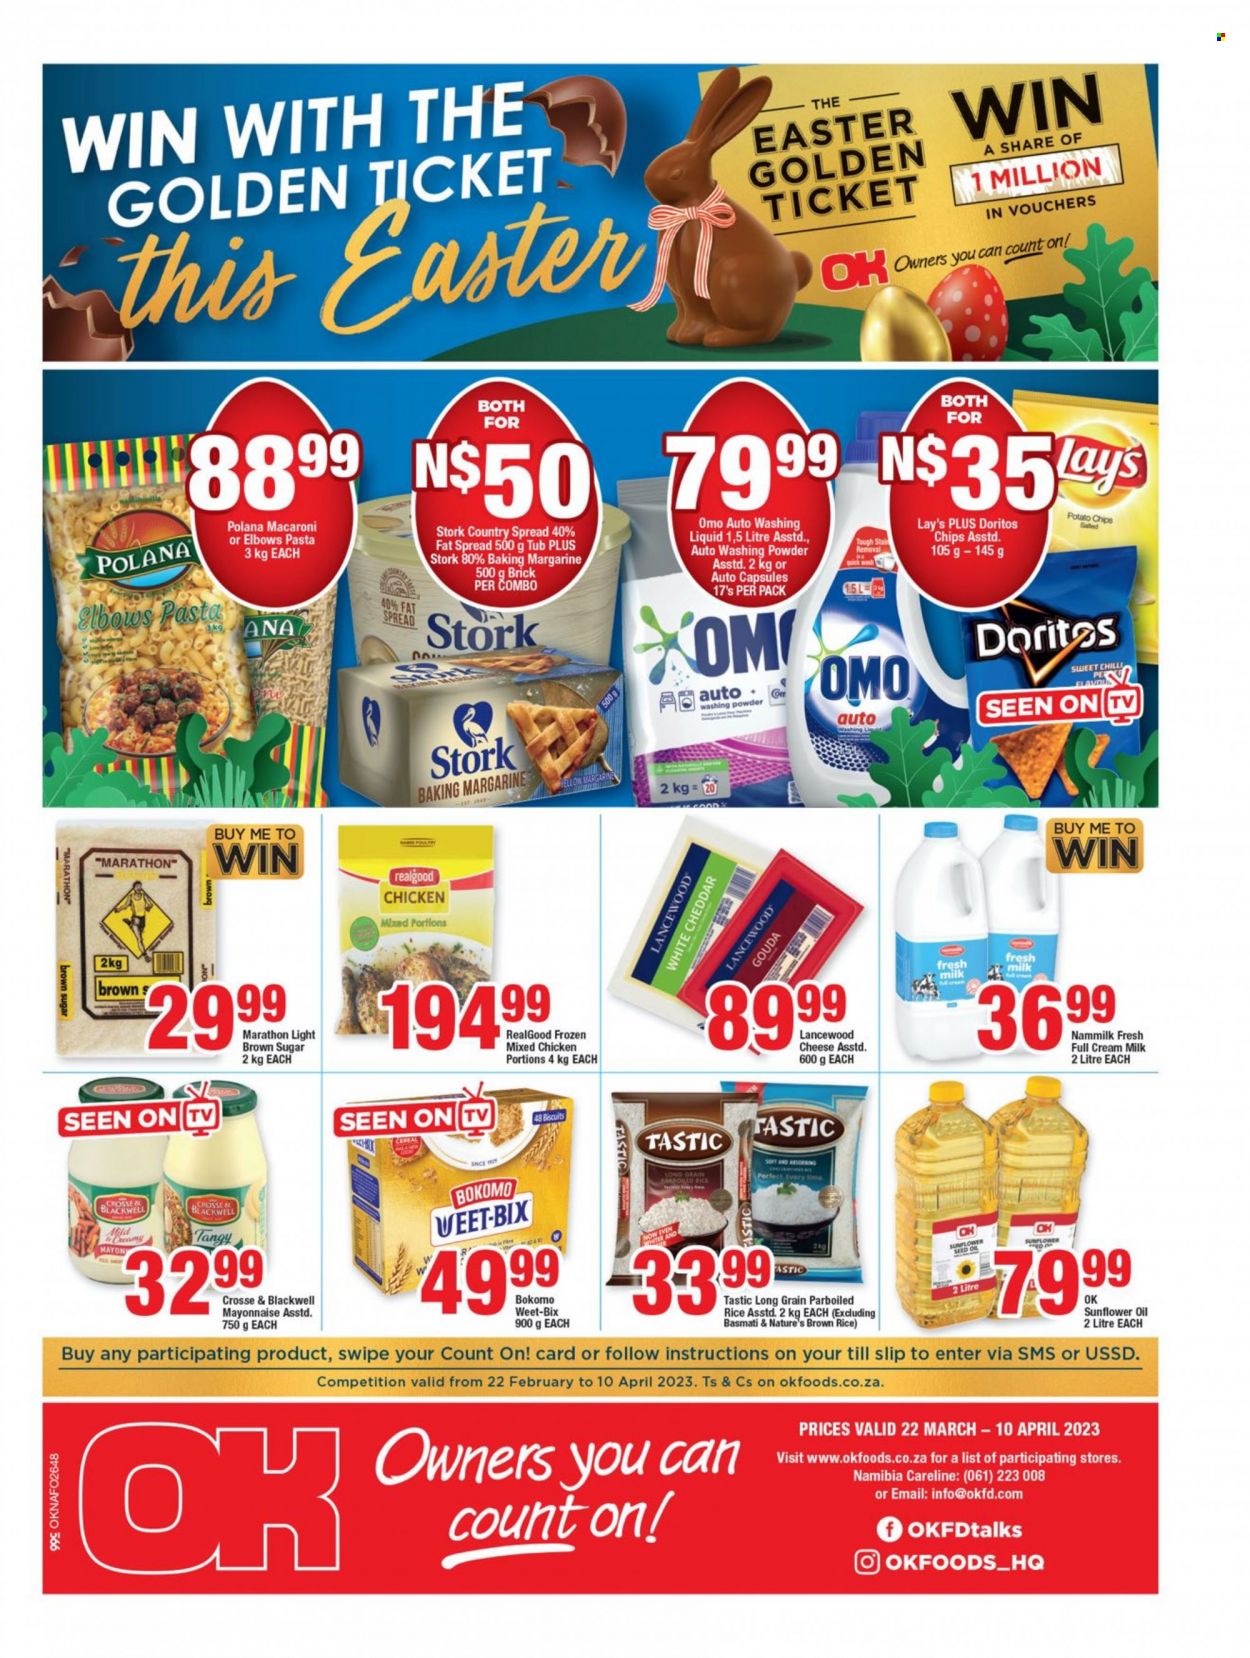 thumbnail - OK catalogue  - 22/03/2023 - 10/04/2023 - Sales products - macaroni, pasta, gouda, cheese, Lancewood, margarine, fat spread, baking margarine, mayonnaise, biscuit, Doritos, potato chips, Lay’s, cane sugar, cereals, Weet-Bix, basmati rice, brown rice, rice, parboiled rice, Tastic, sunflower oil, oil, chicken. Page 1.